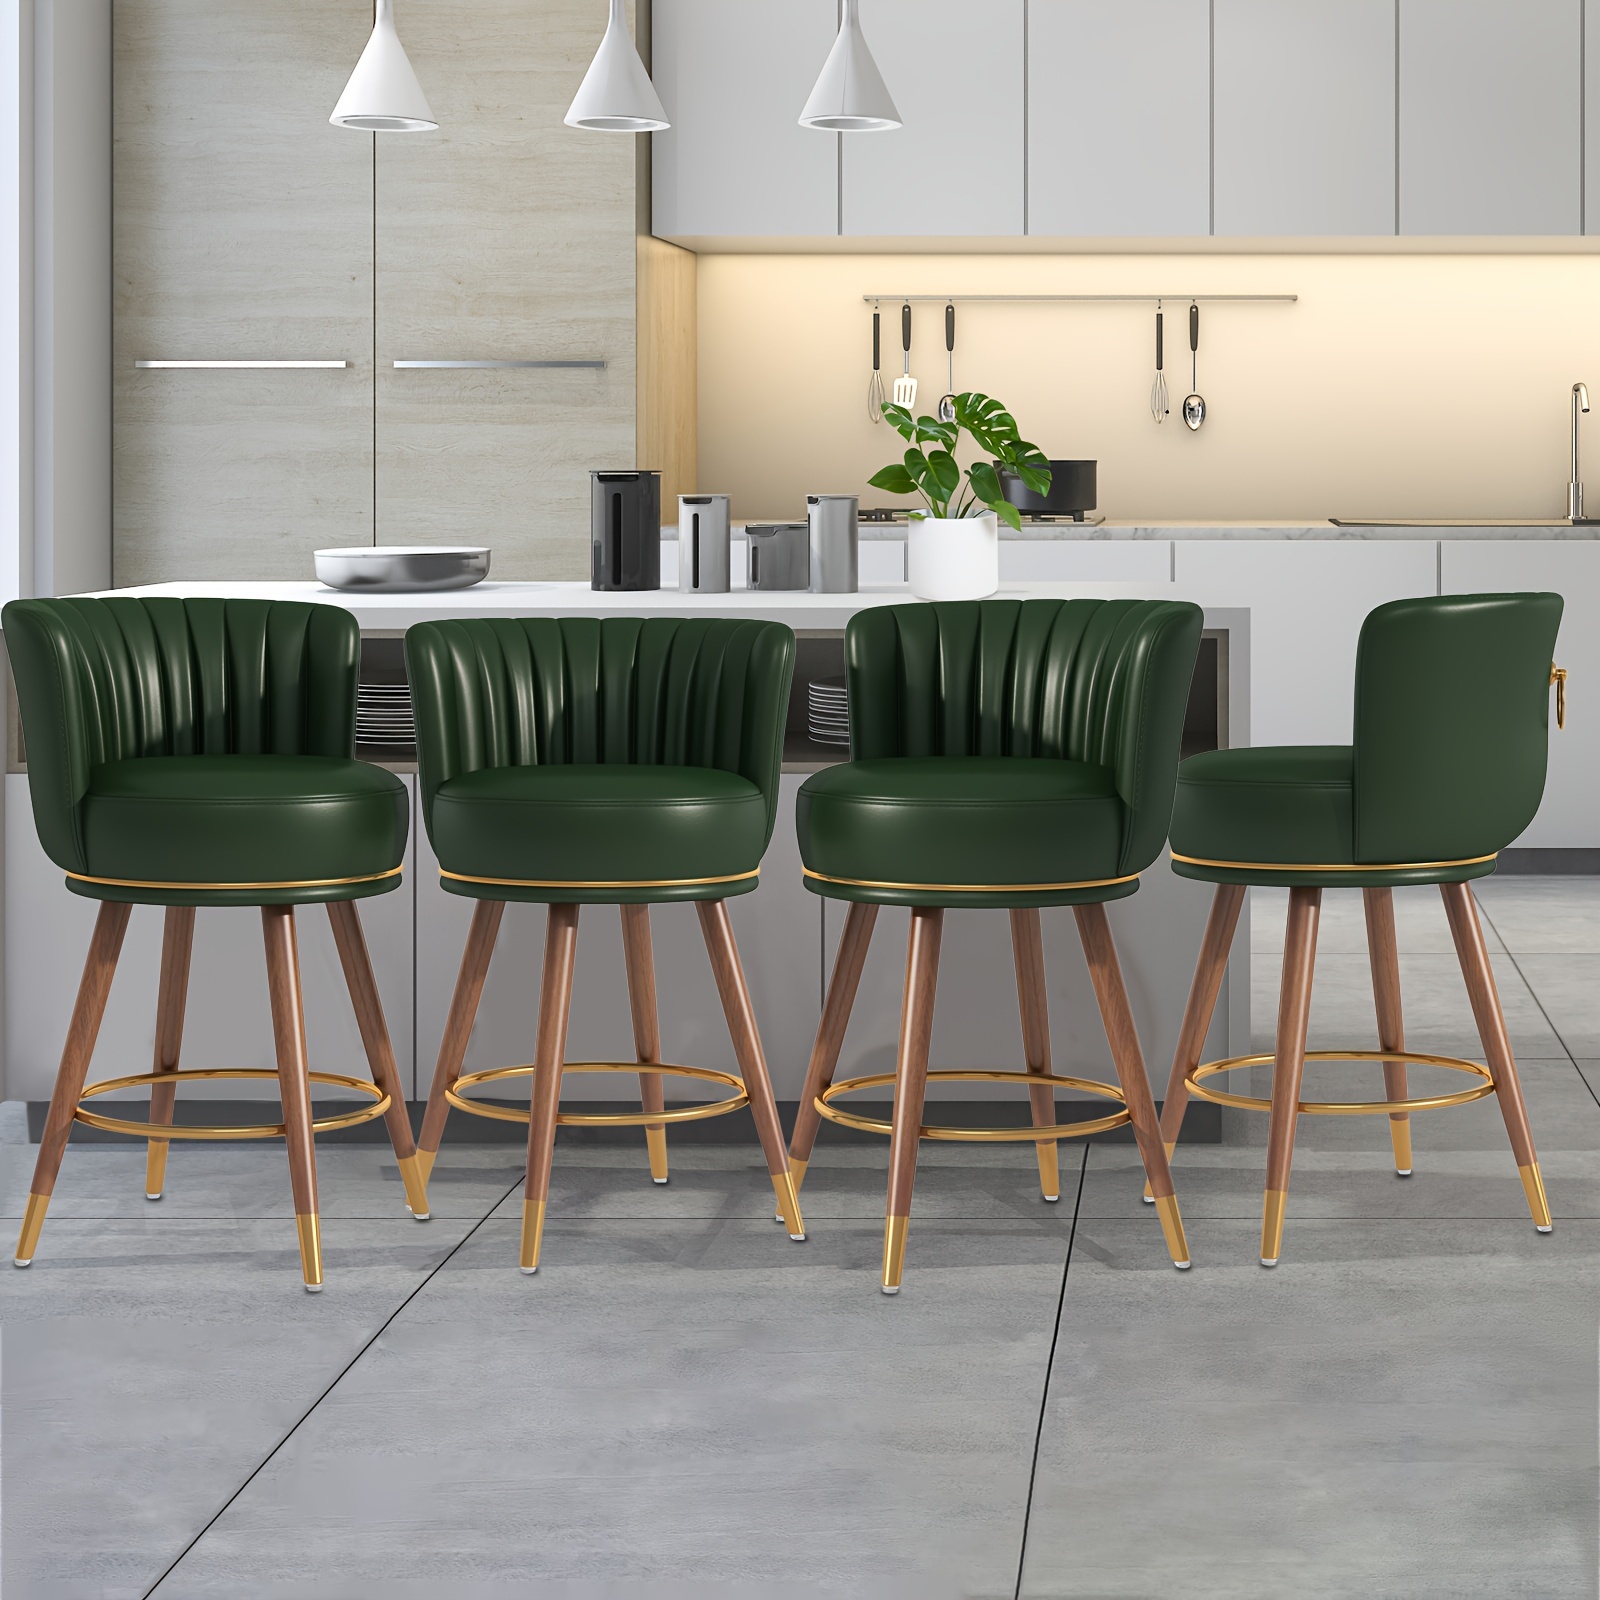 

27" Swivel Bar Stools Set Of 4, Counter Height Bar Stools With Back, 360 Swivel Bar Chairs With Gold Footrest, Upholstered Green Bar Stool For Kitchens Island, Rustic Bar, 300lbs